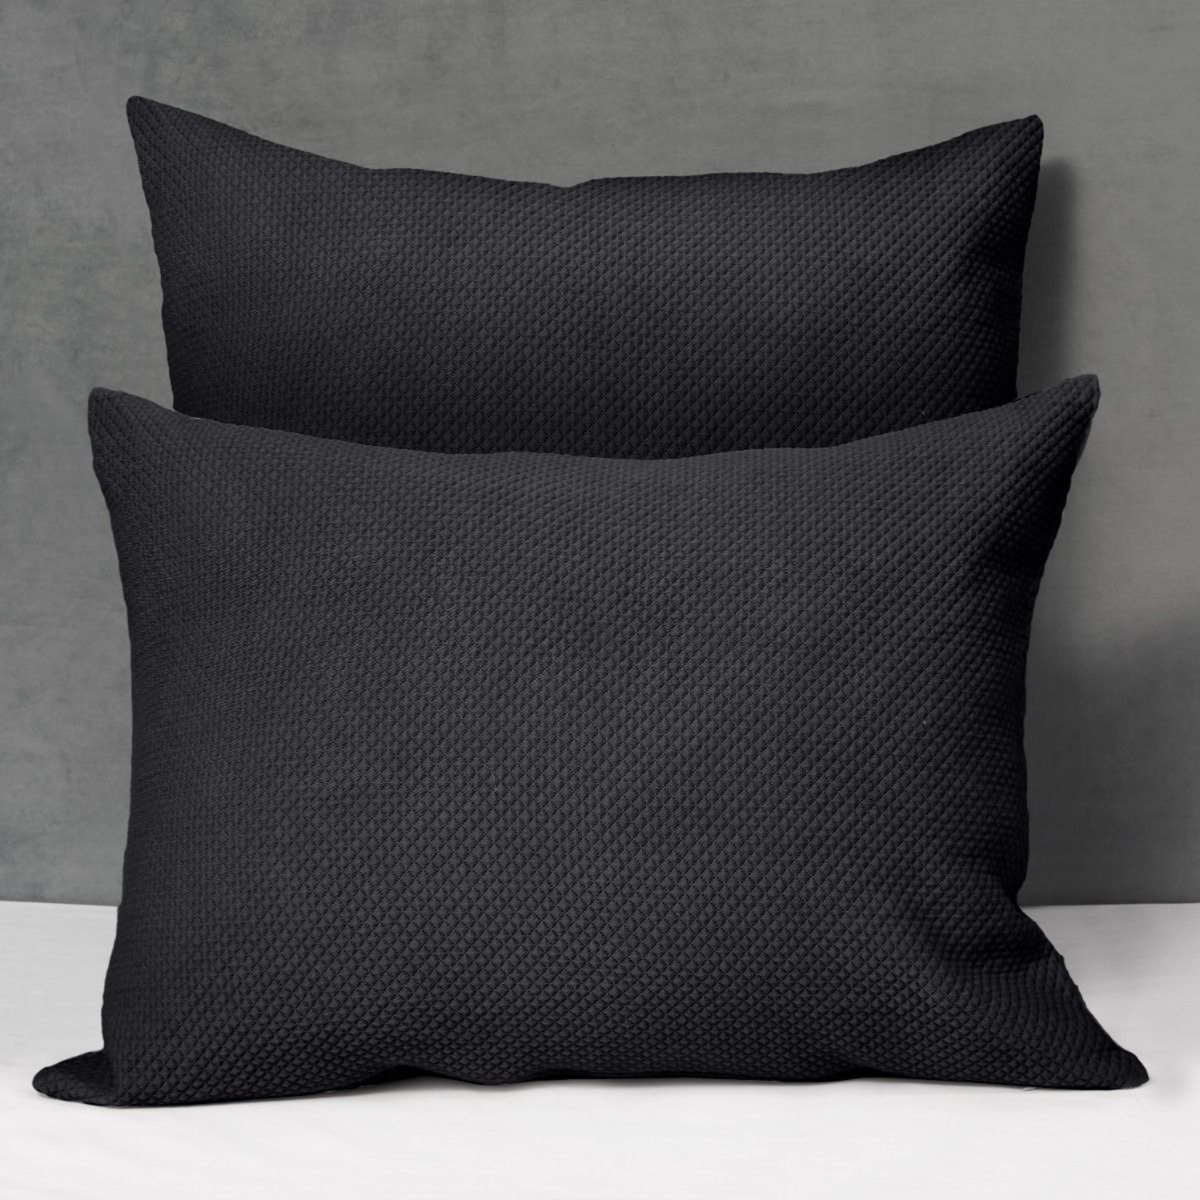 Two Shams of Signoria Olivia in Charcoal Colors